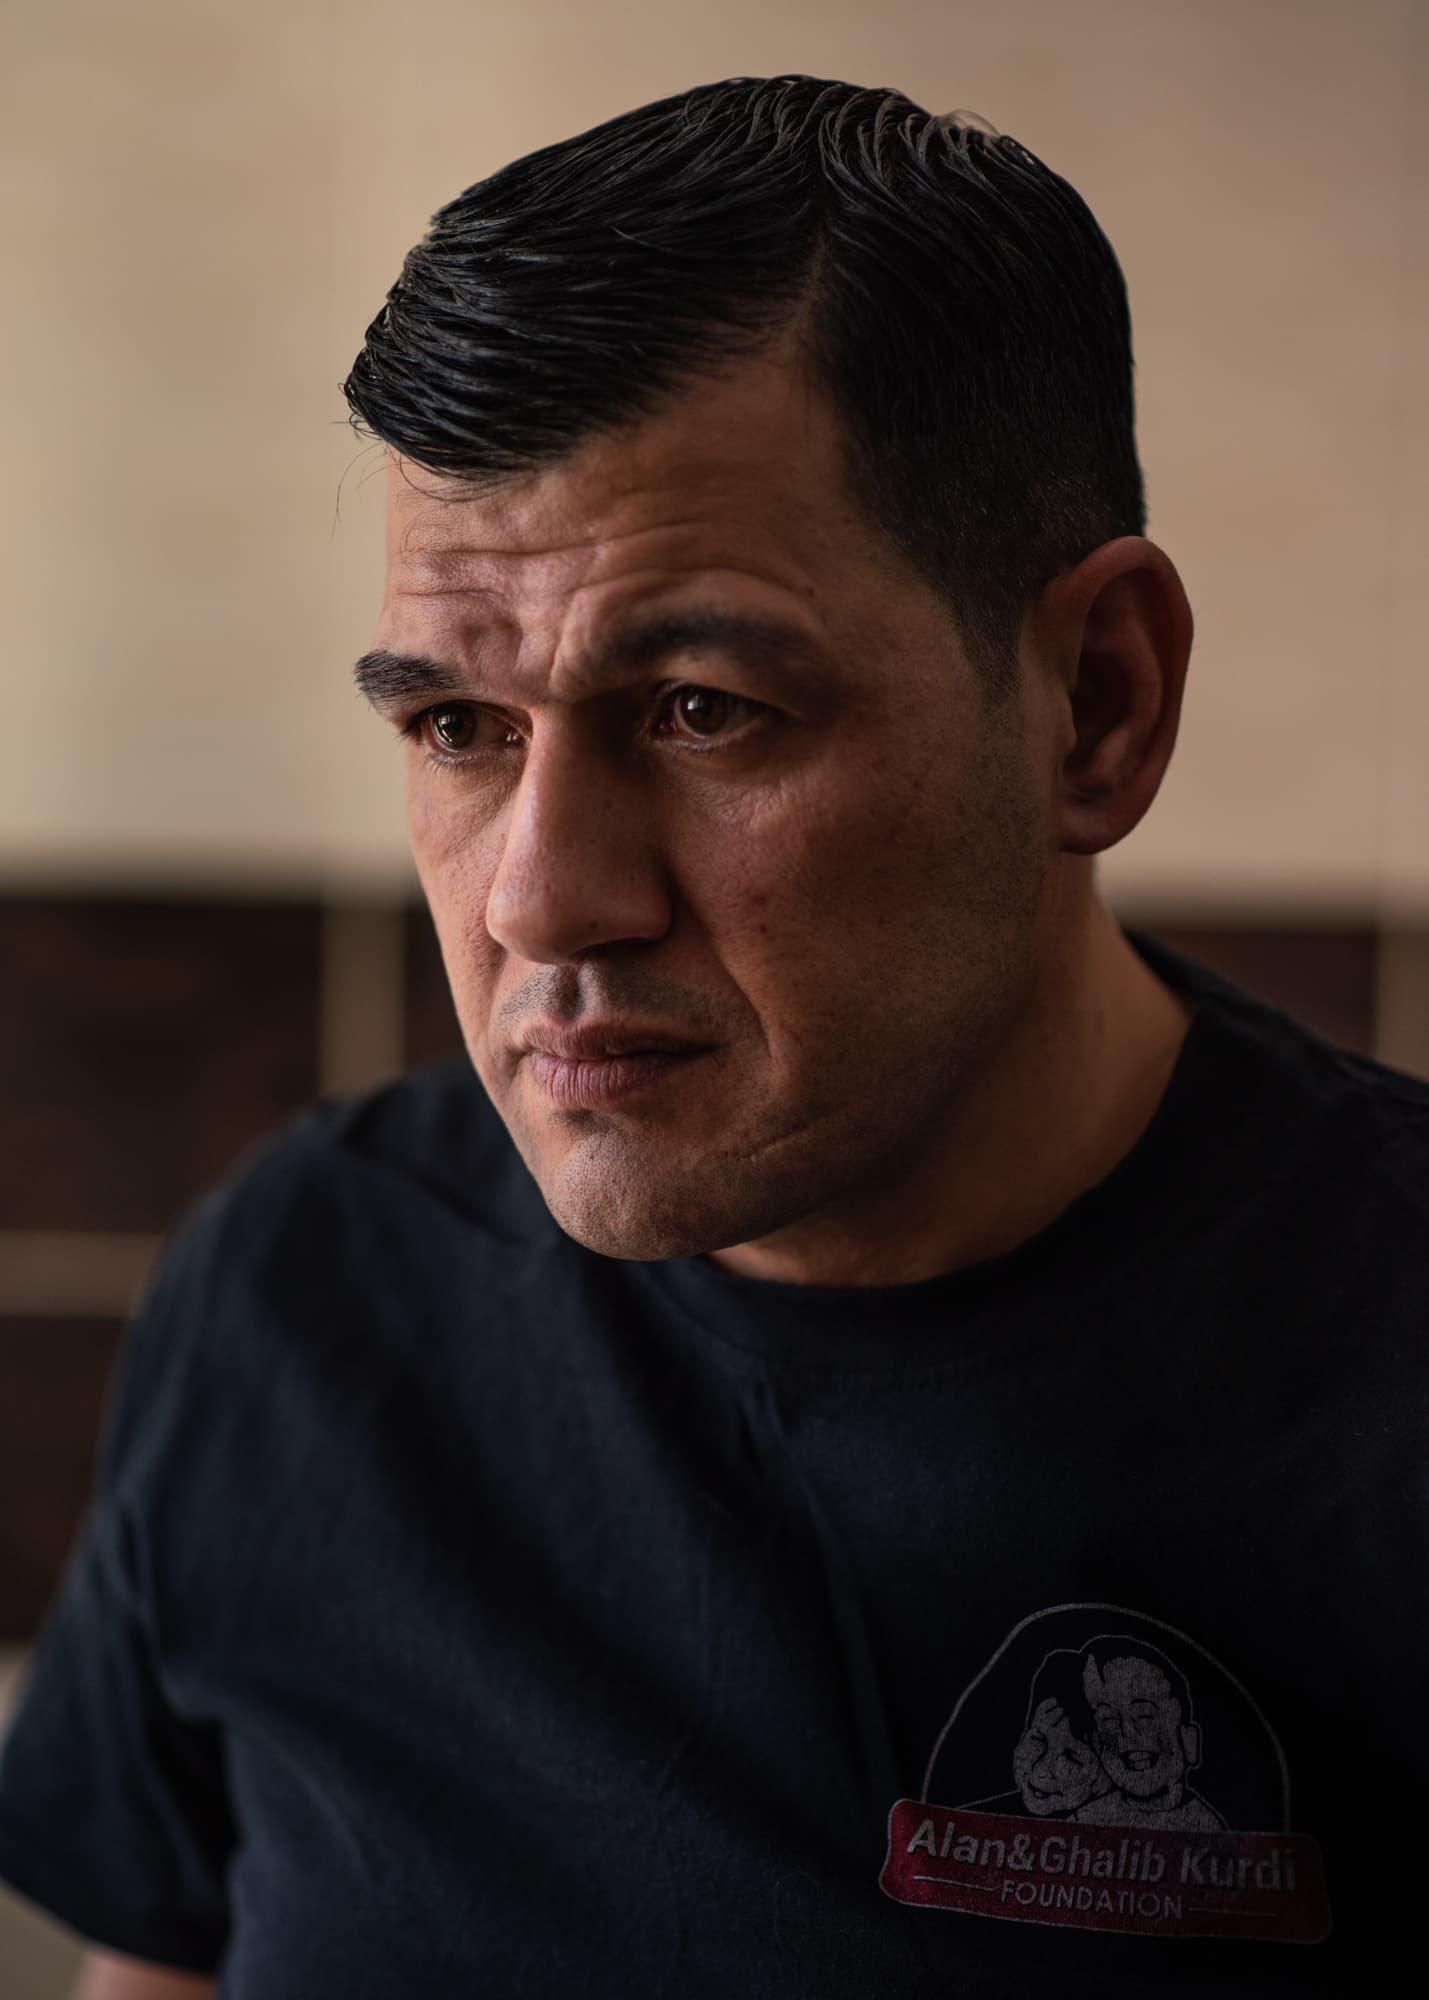 Portrait of Abdullah Kurdi on the morning of the anniversary of the death of Abdullah's family, in Erbil, Iraq on September 2nd, 2019.